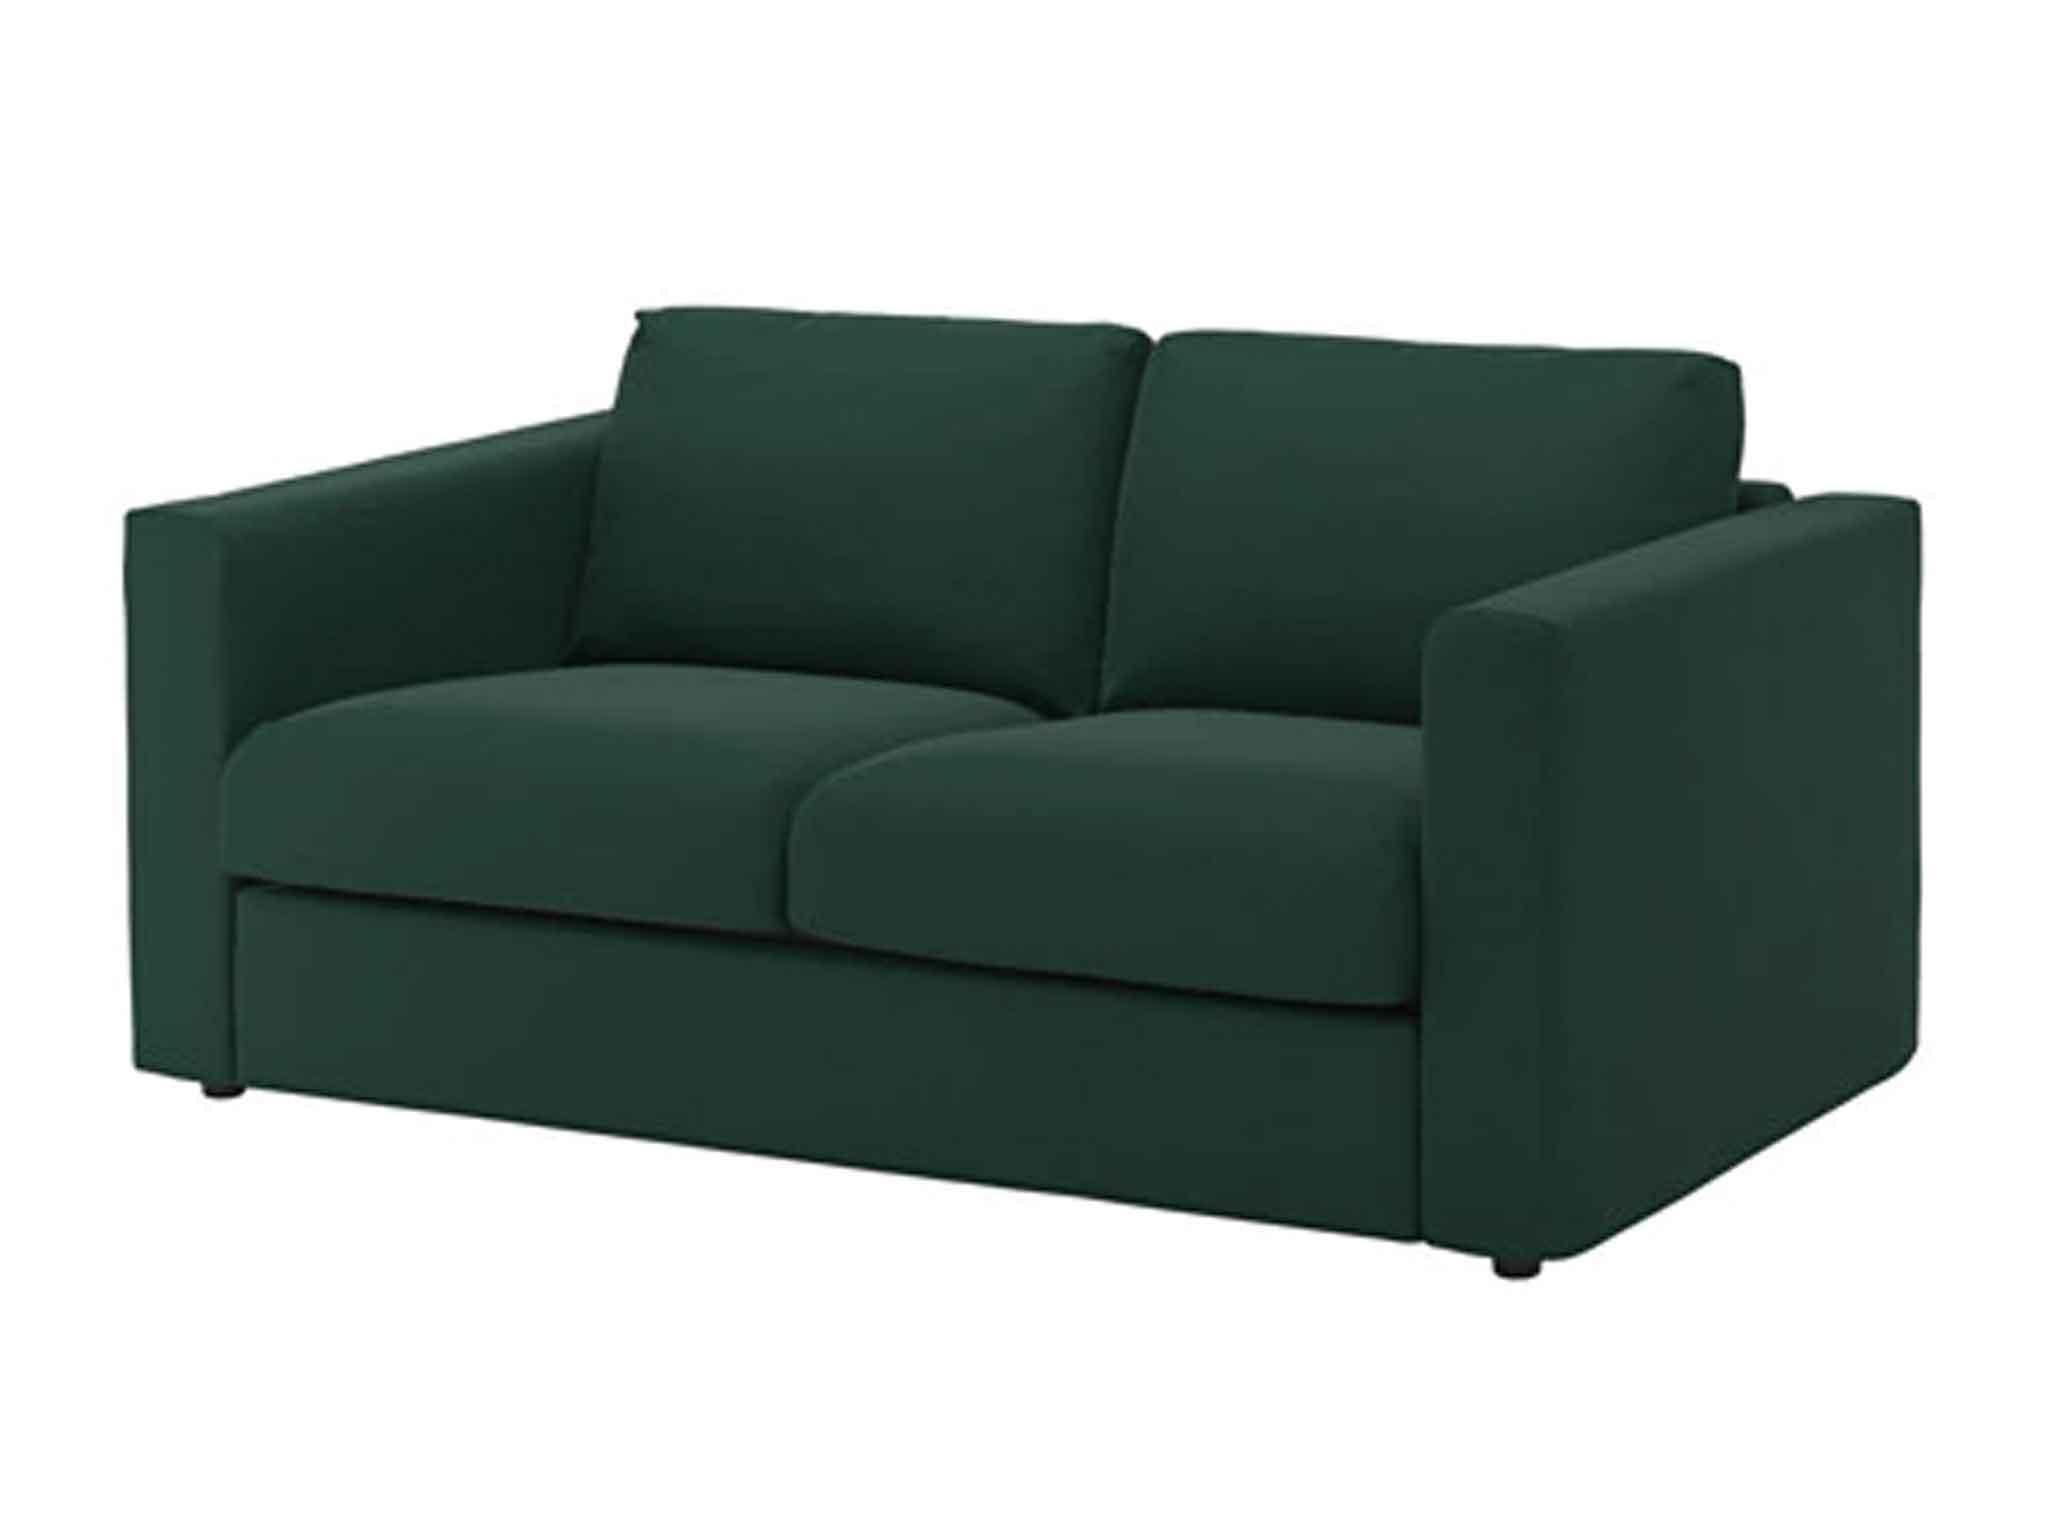 10 Best 2 Seater Sofas The Independent